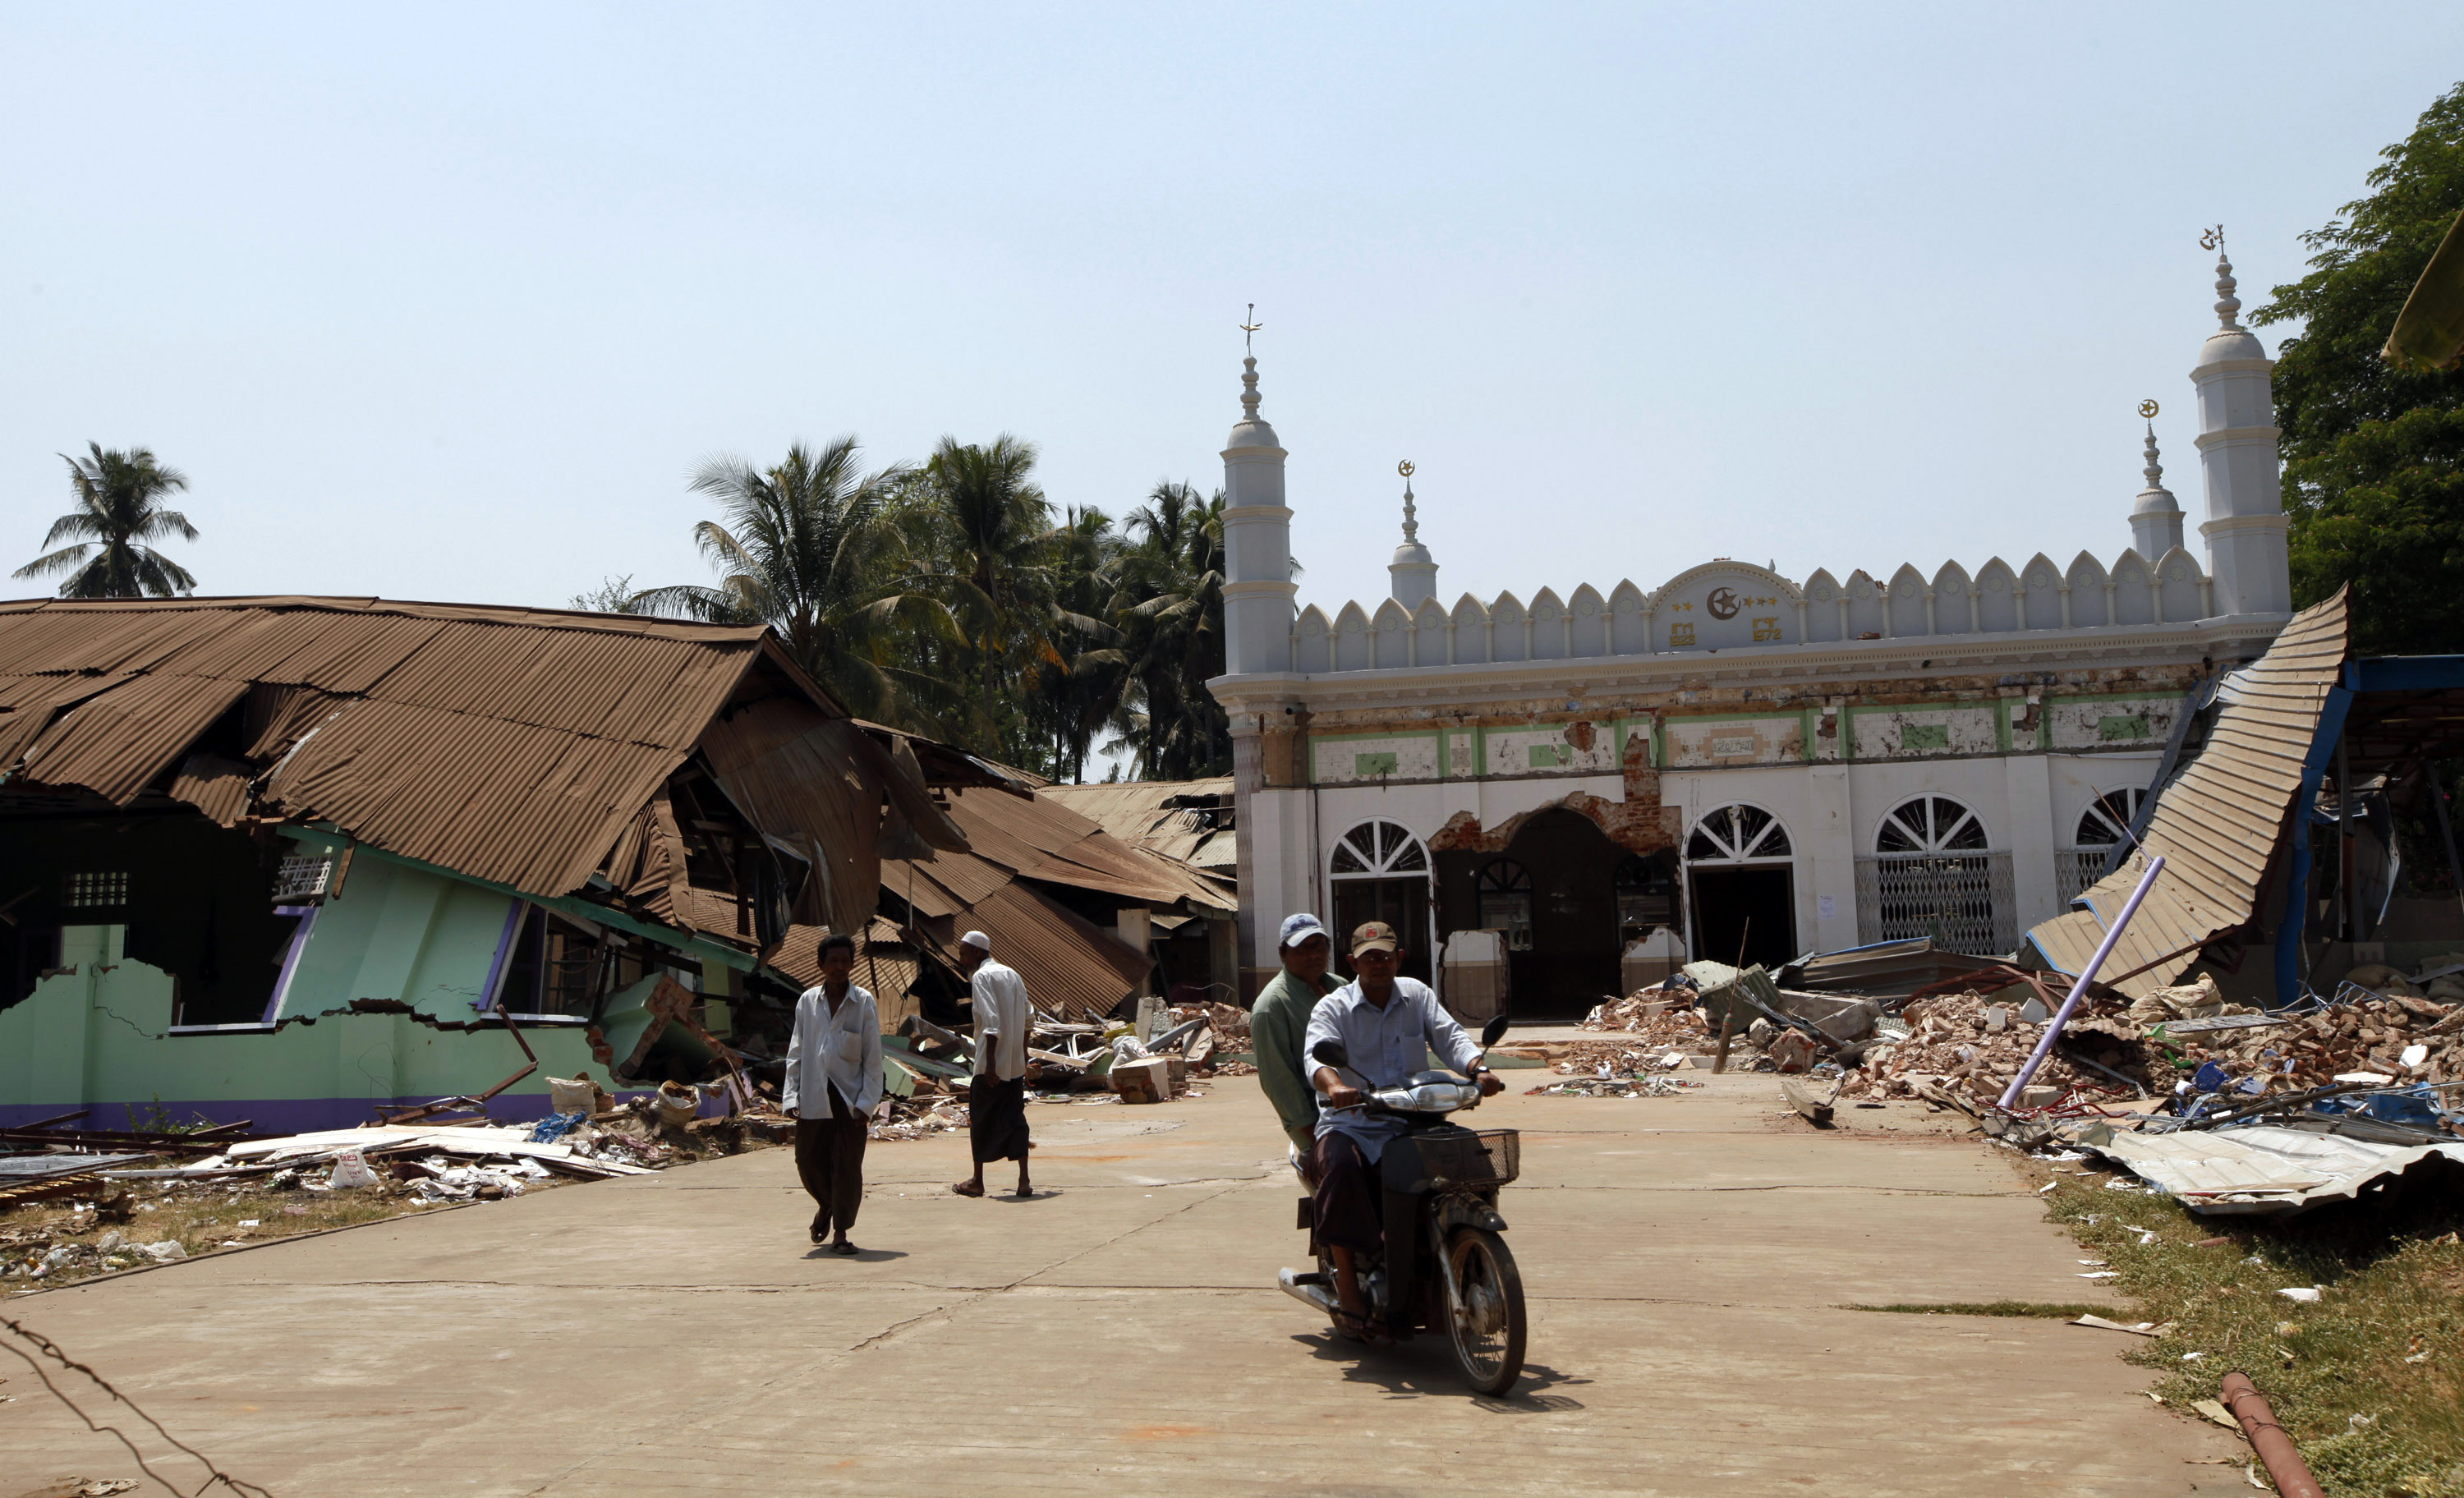 Men ride on a motorbike as others remove debris from a destroyed mosque, in Gyobingauk, about 125 miles from Yangon, Myanmar. Photo: AP